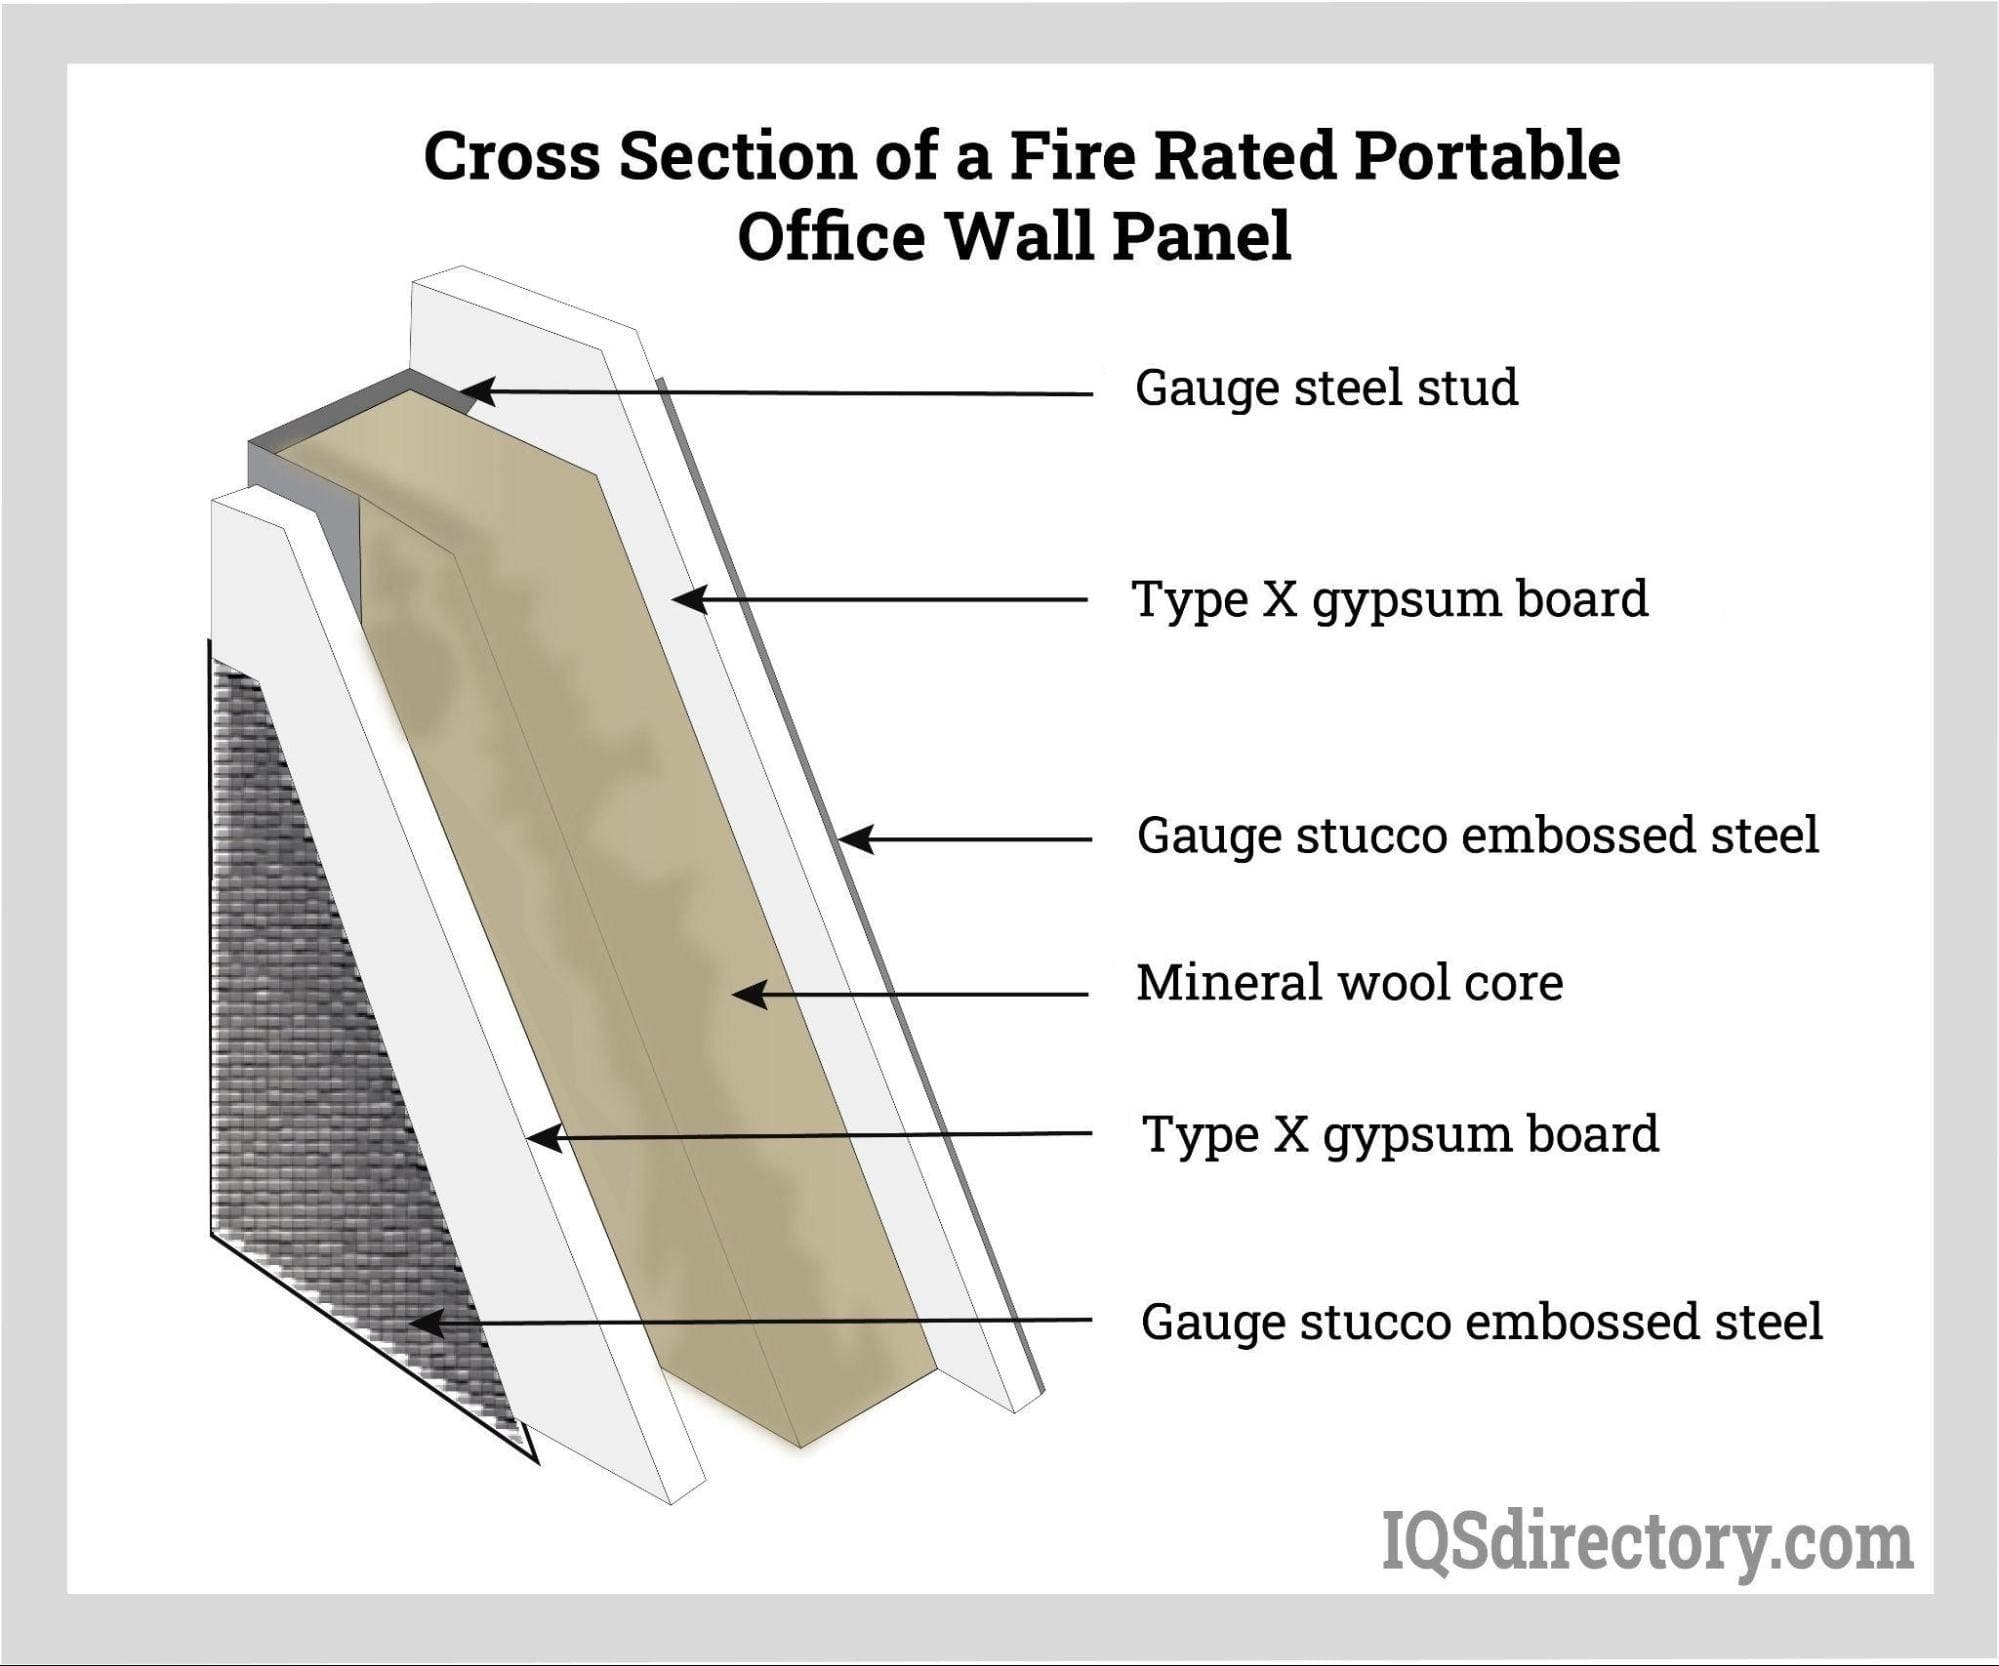 Cross Section of a Fire Rated Portable Office Wall Panel